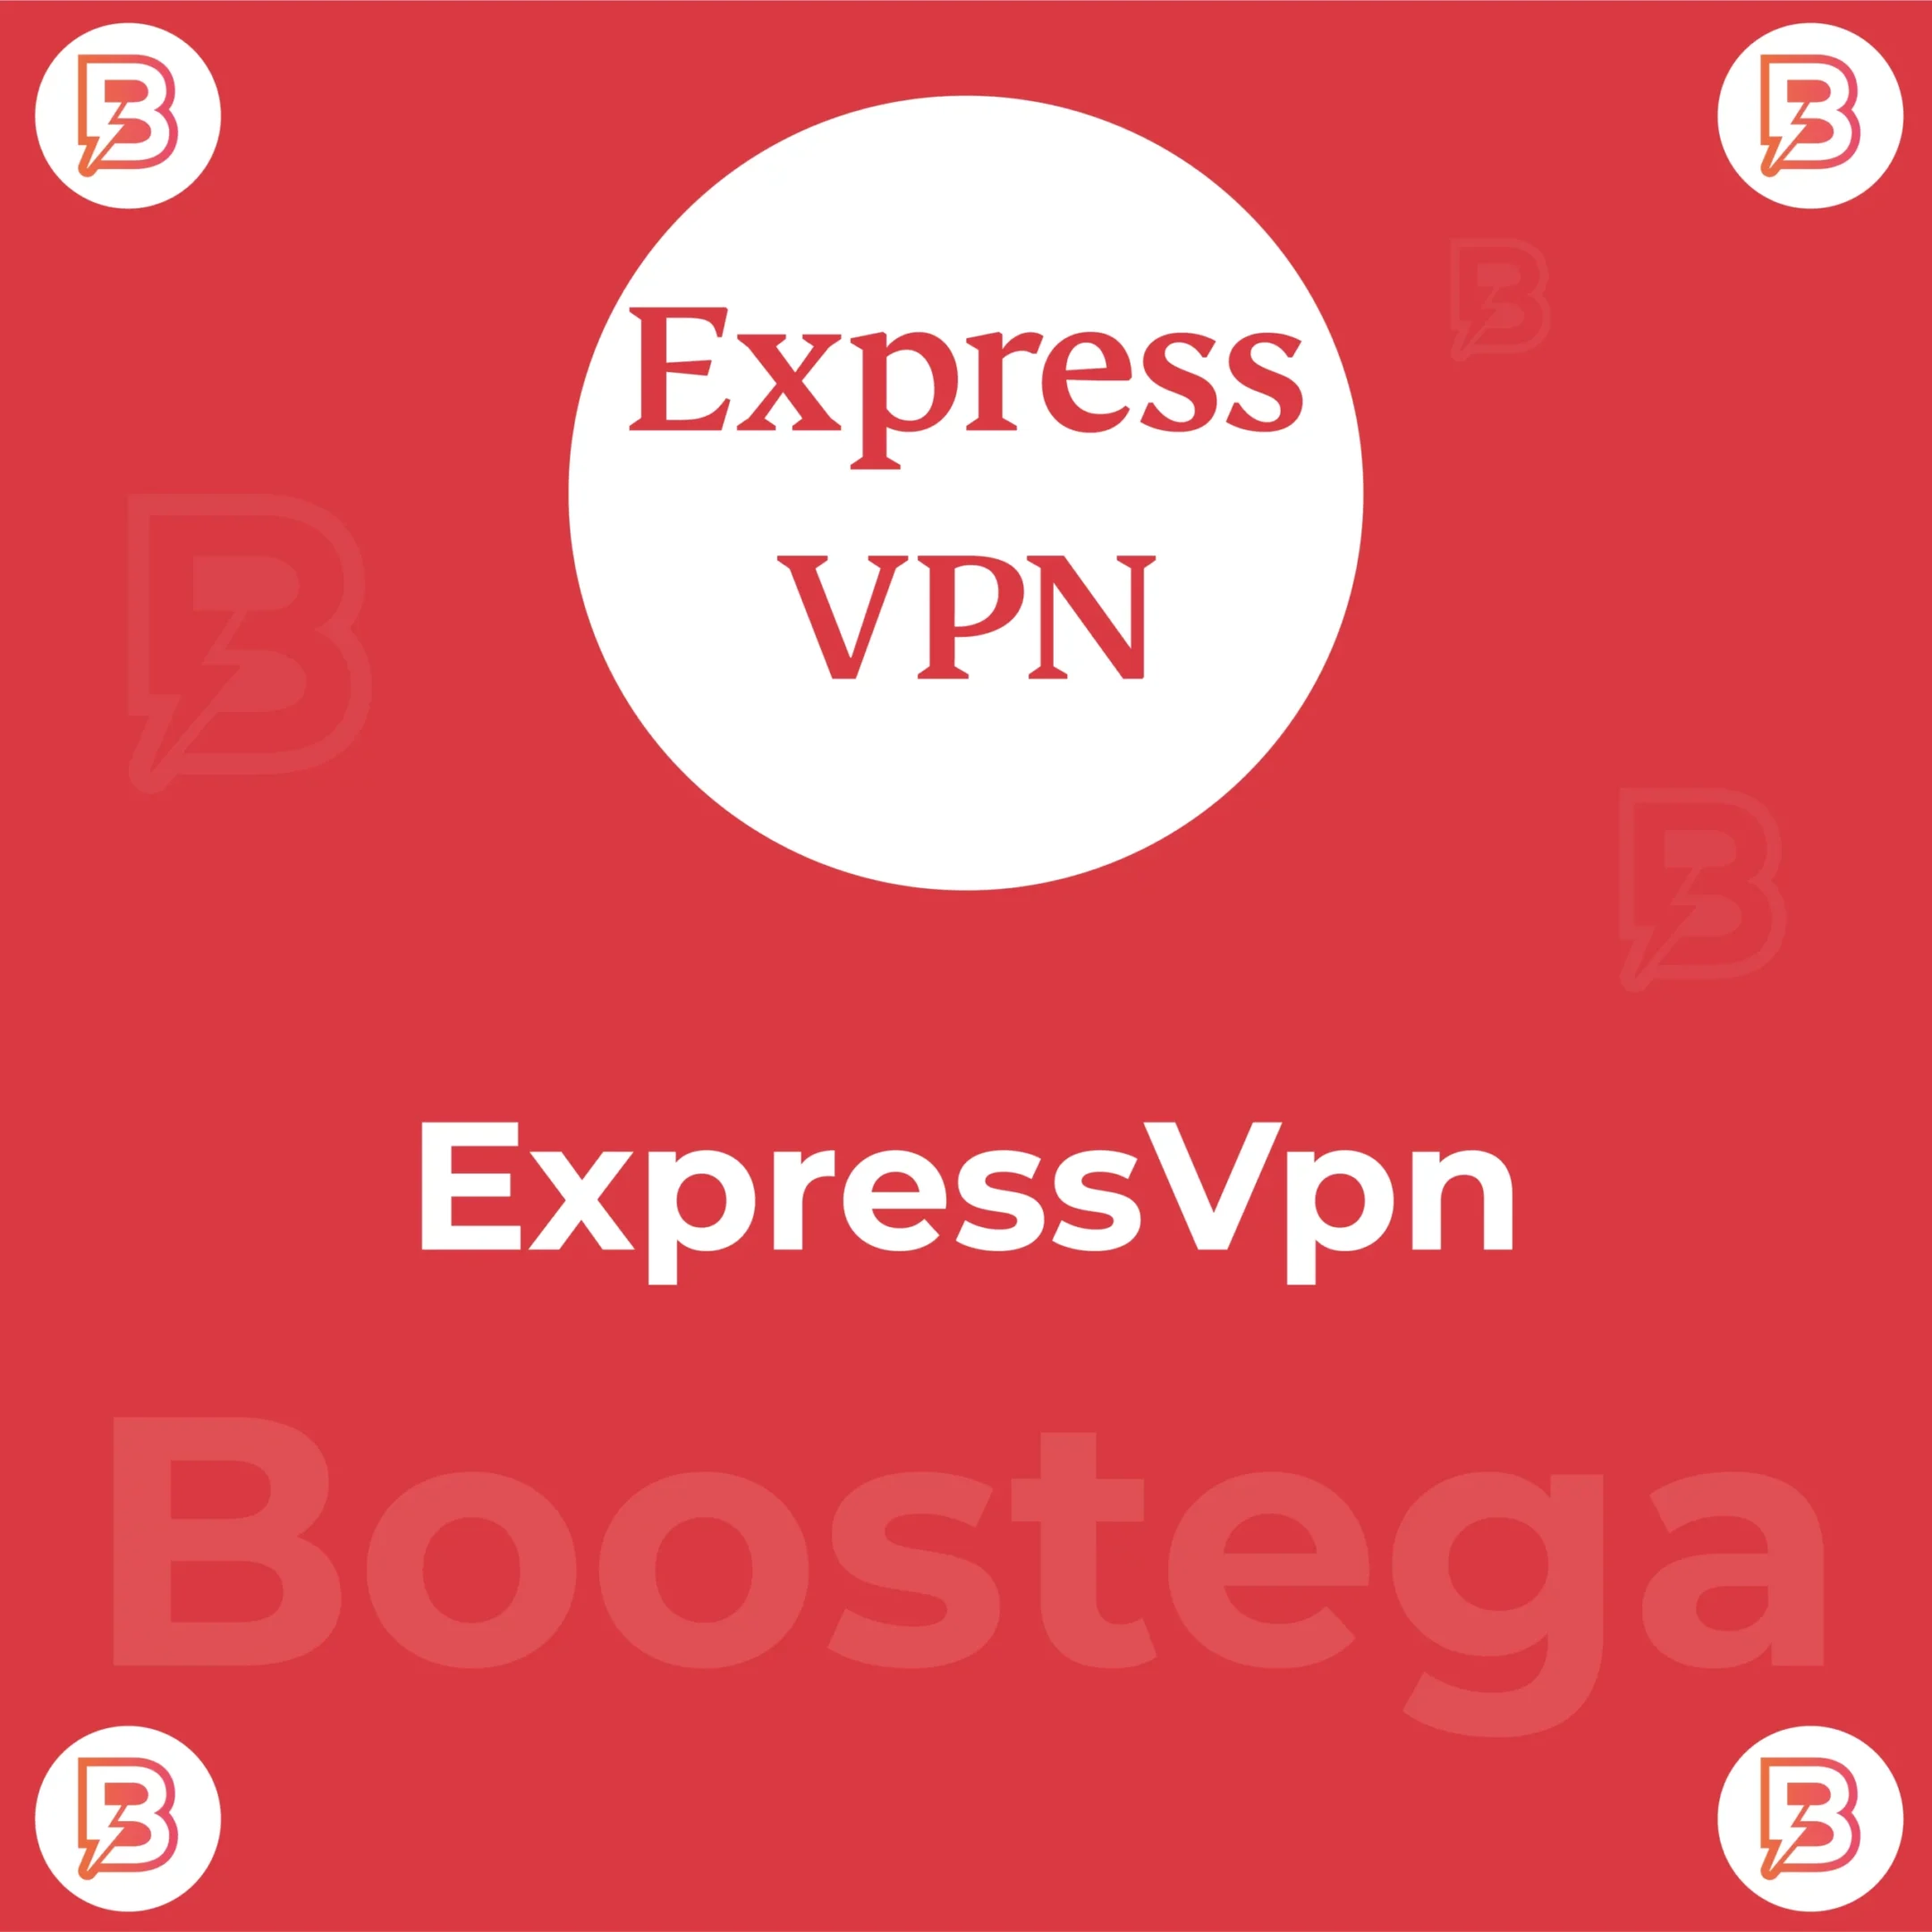 Buy Express VPN Premium Account at Boostega Benefit from our lifetime guarantee, lowest prices, and easy buy-now options, All In One Digital Store